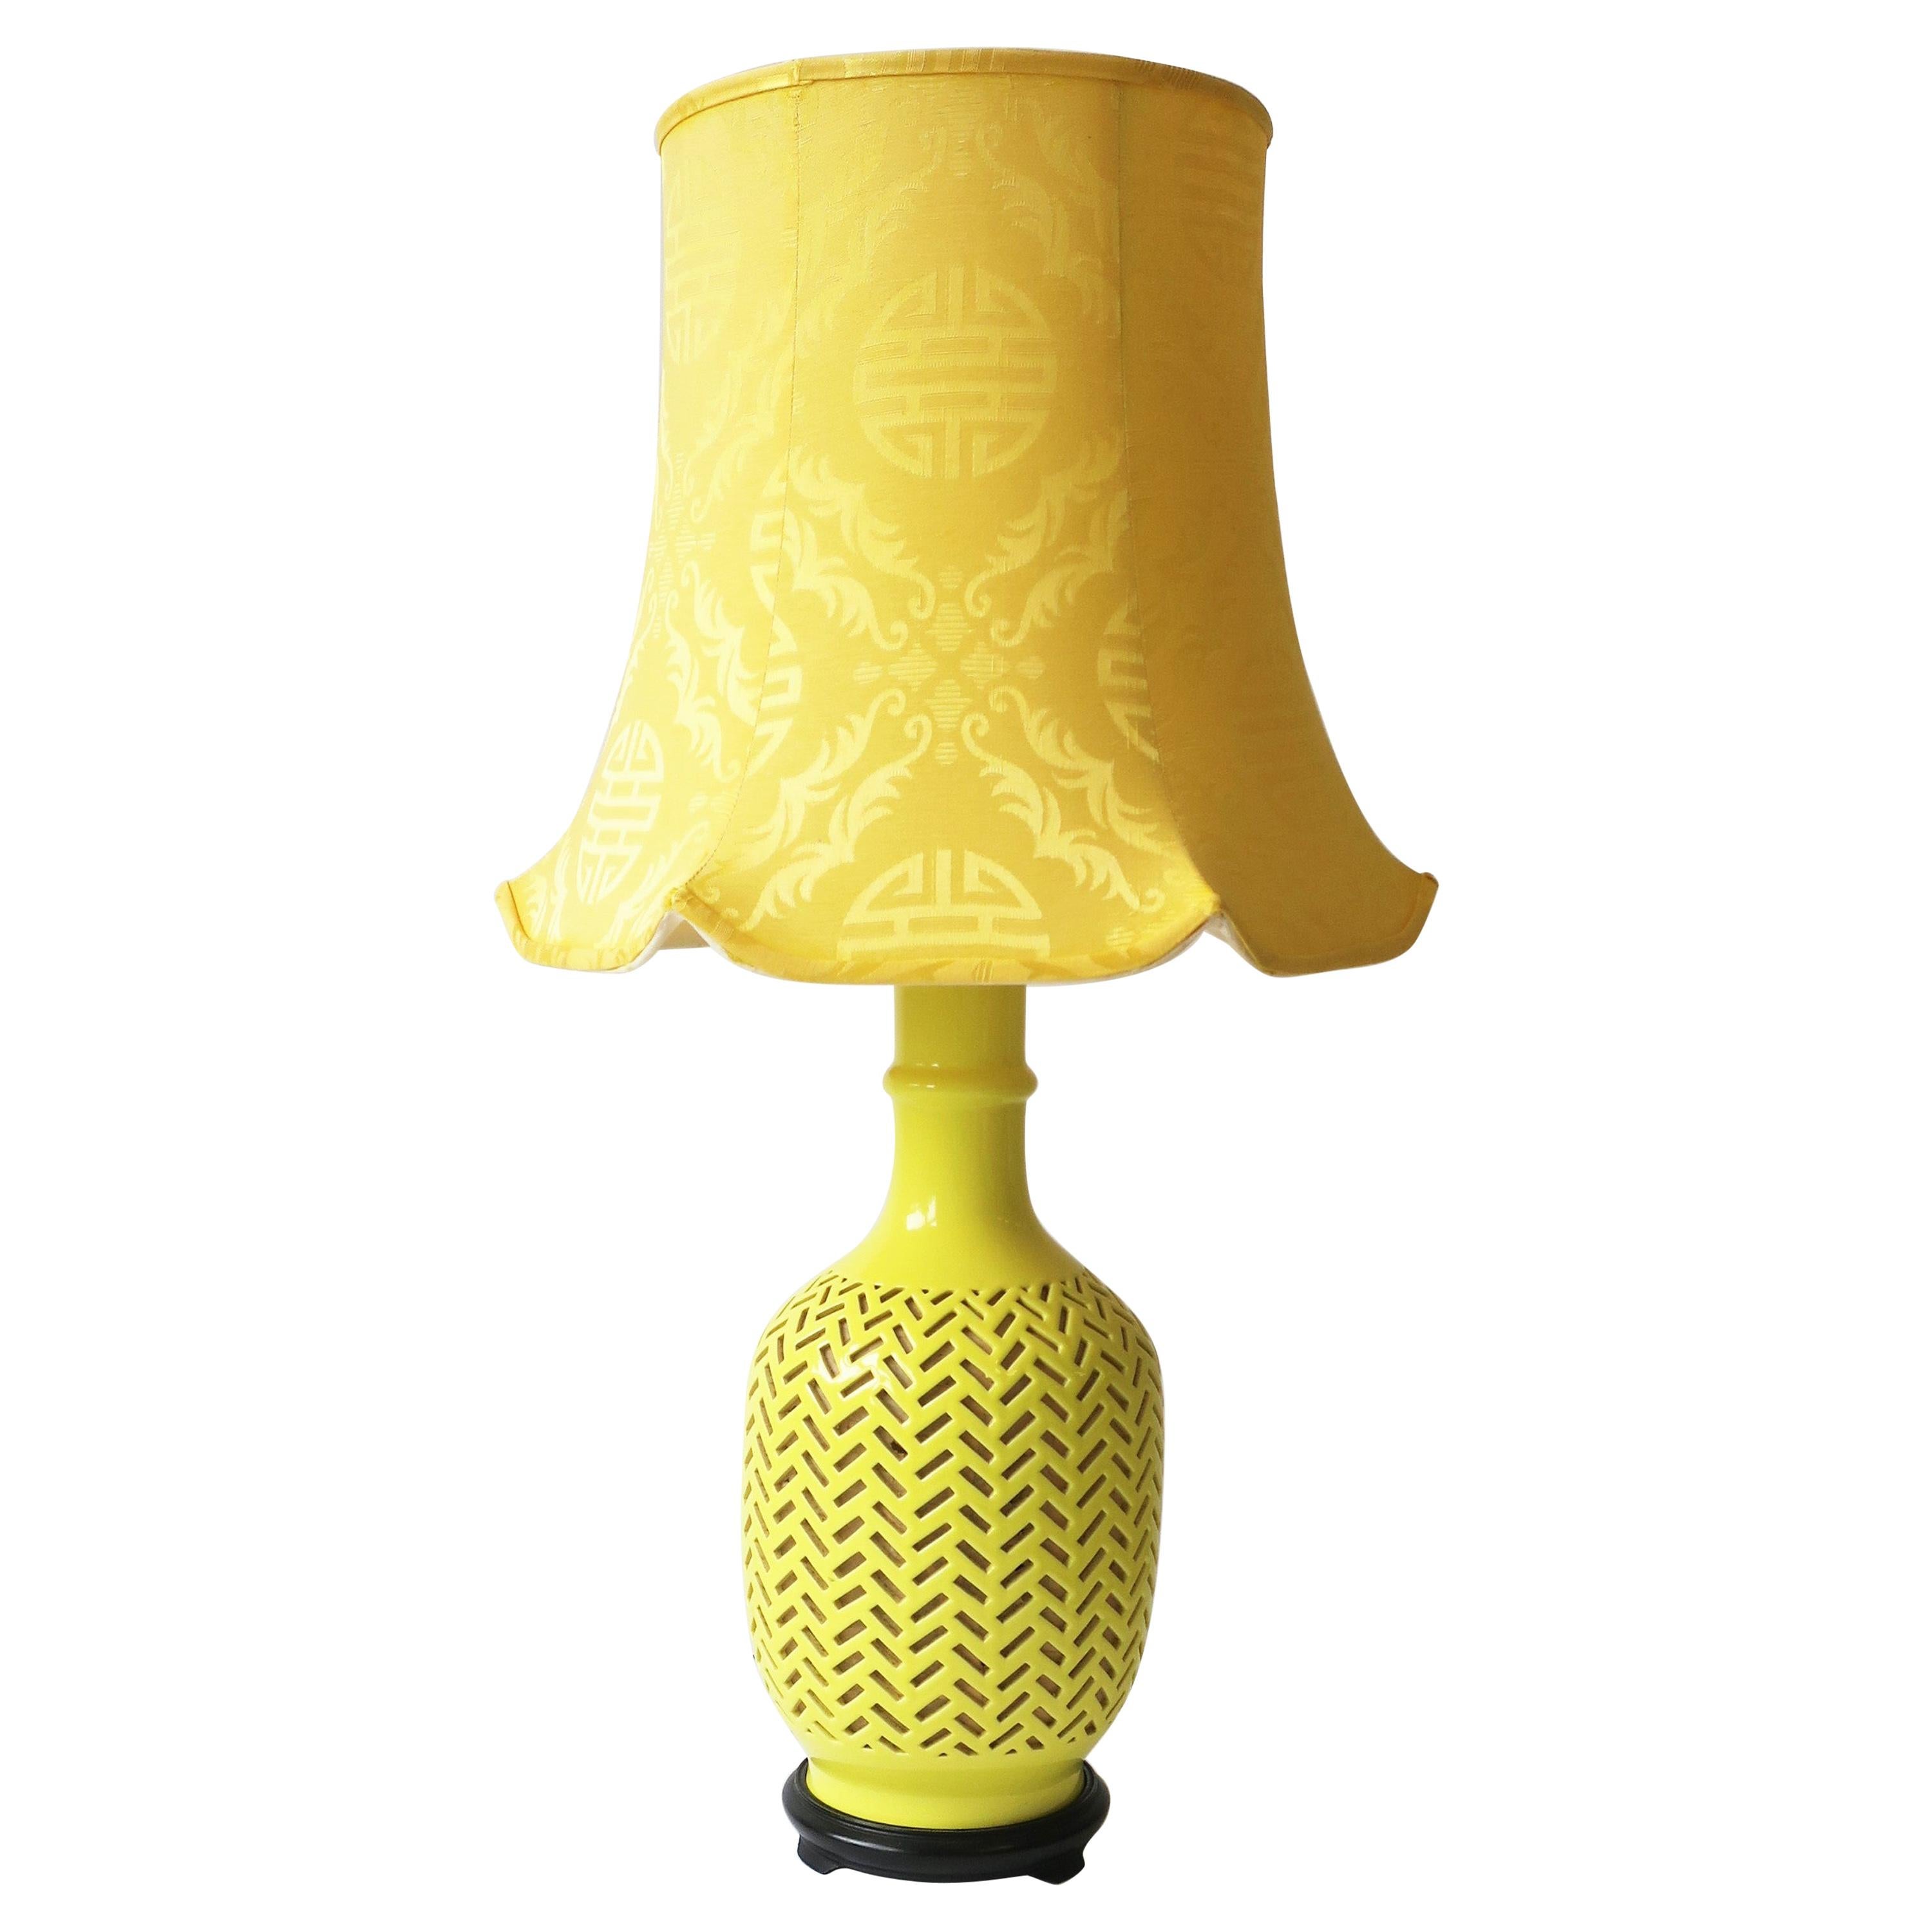 Bright Yellow Ceramic Chevron Chinoiserie Table or Desk Lamp with Silk Shade